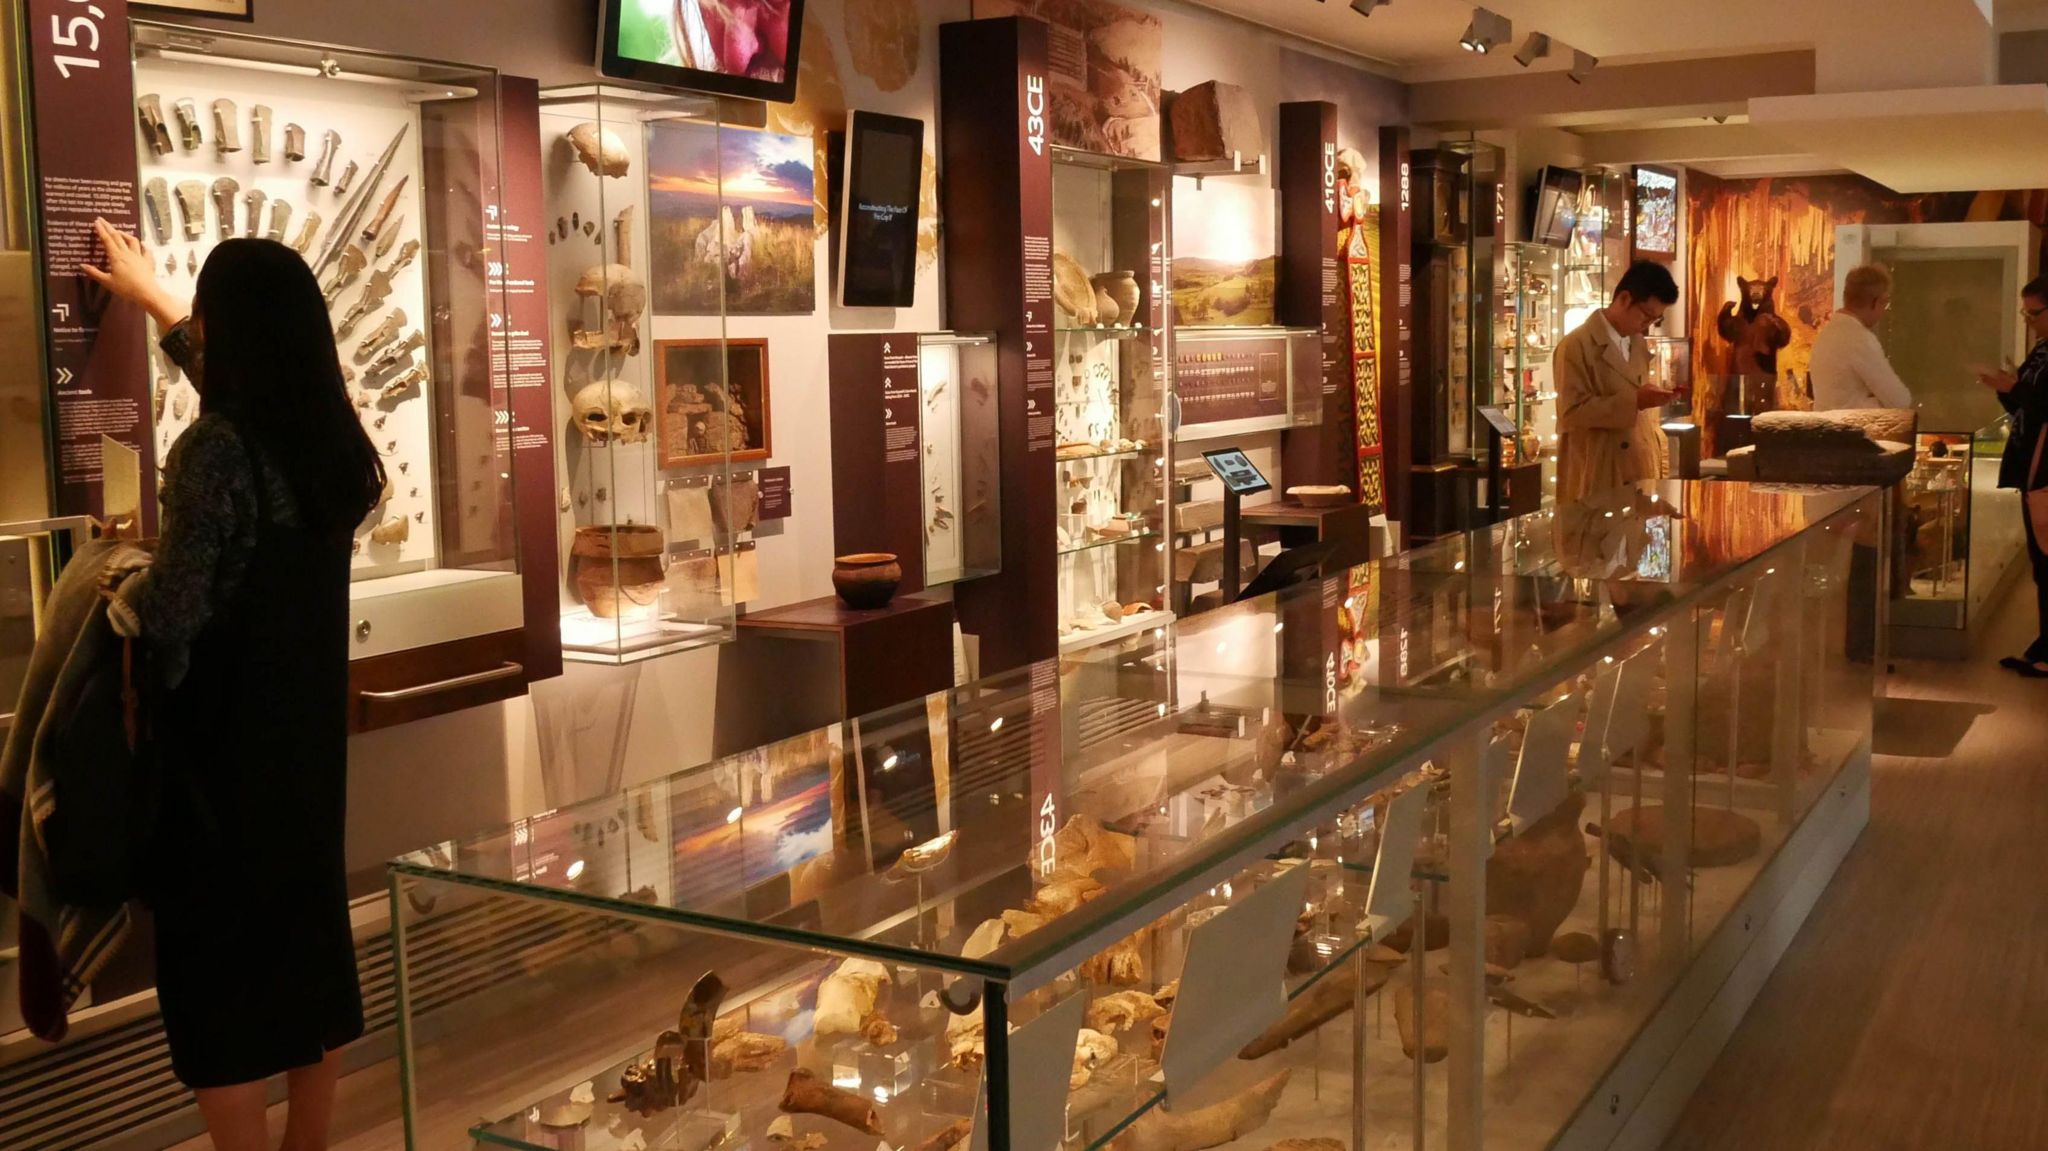 Exhibits in the Buxton Museum